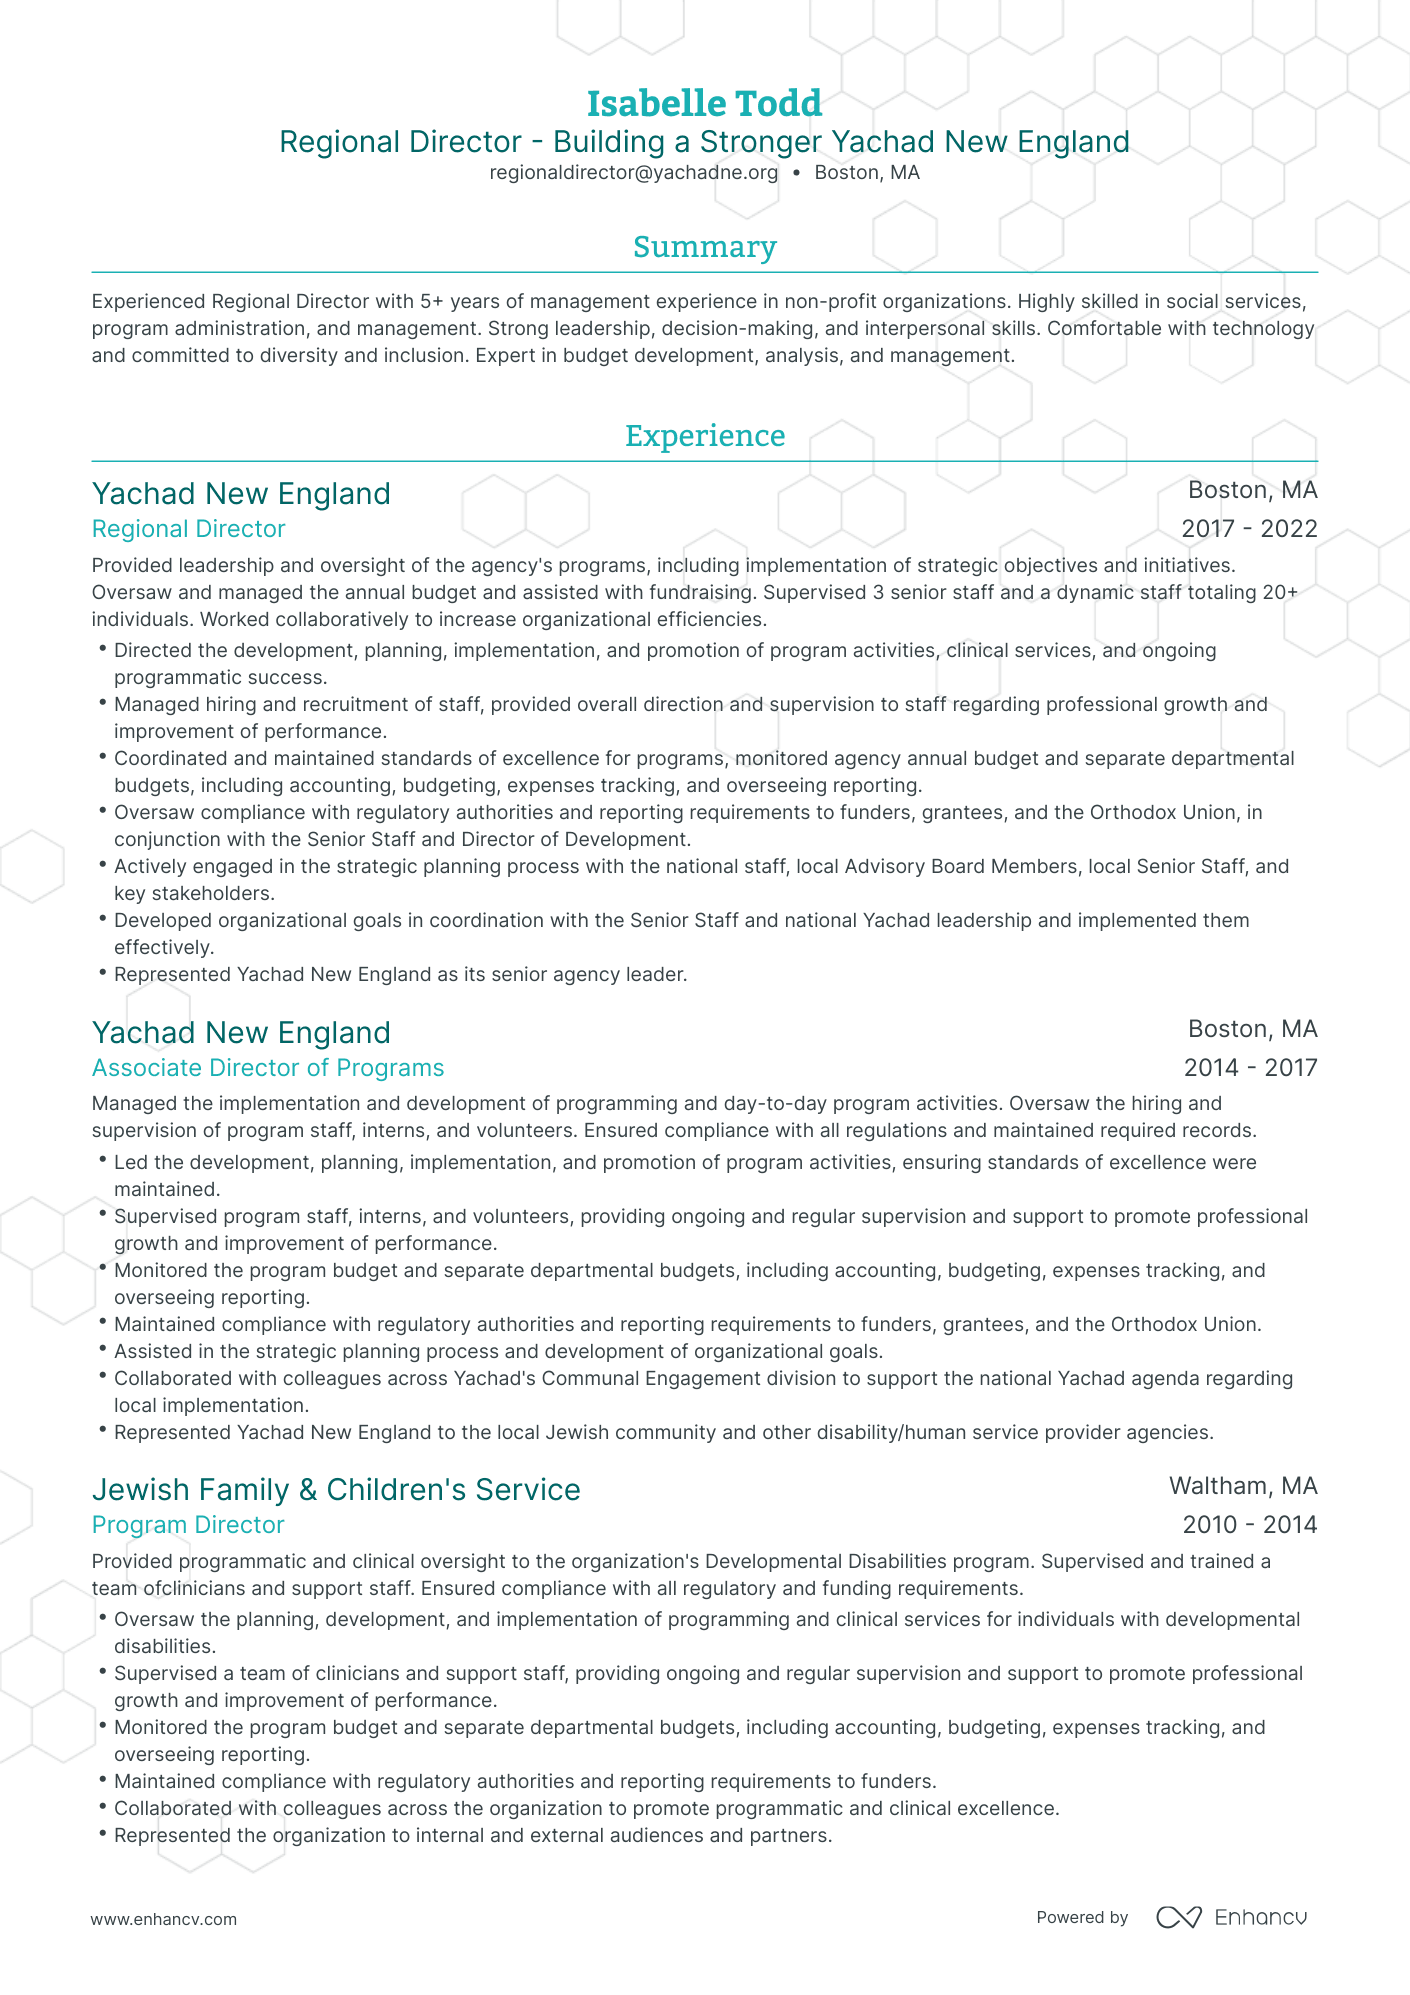 Traditional Regional Director Resume Template